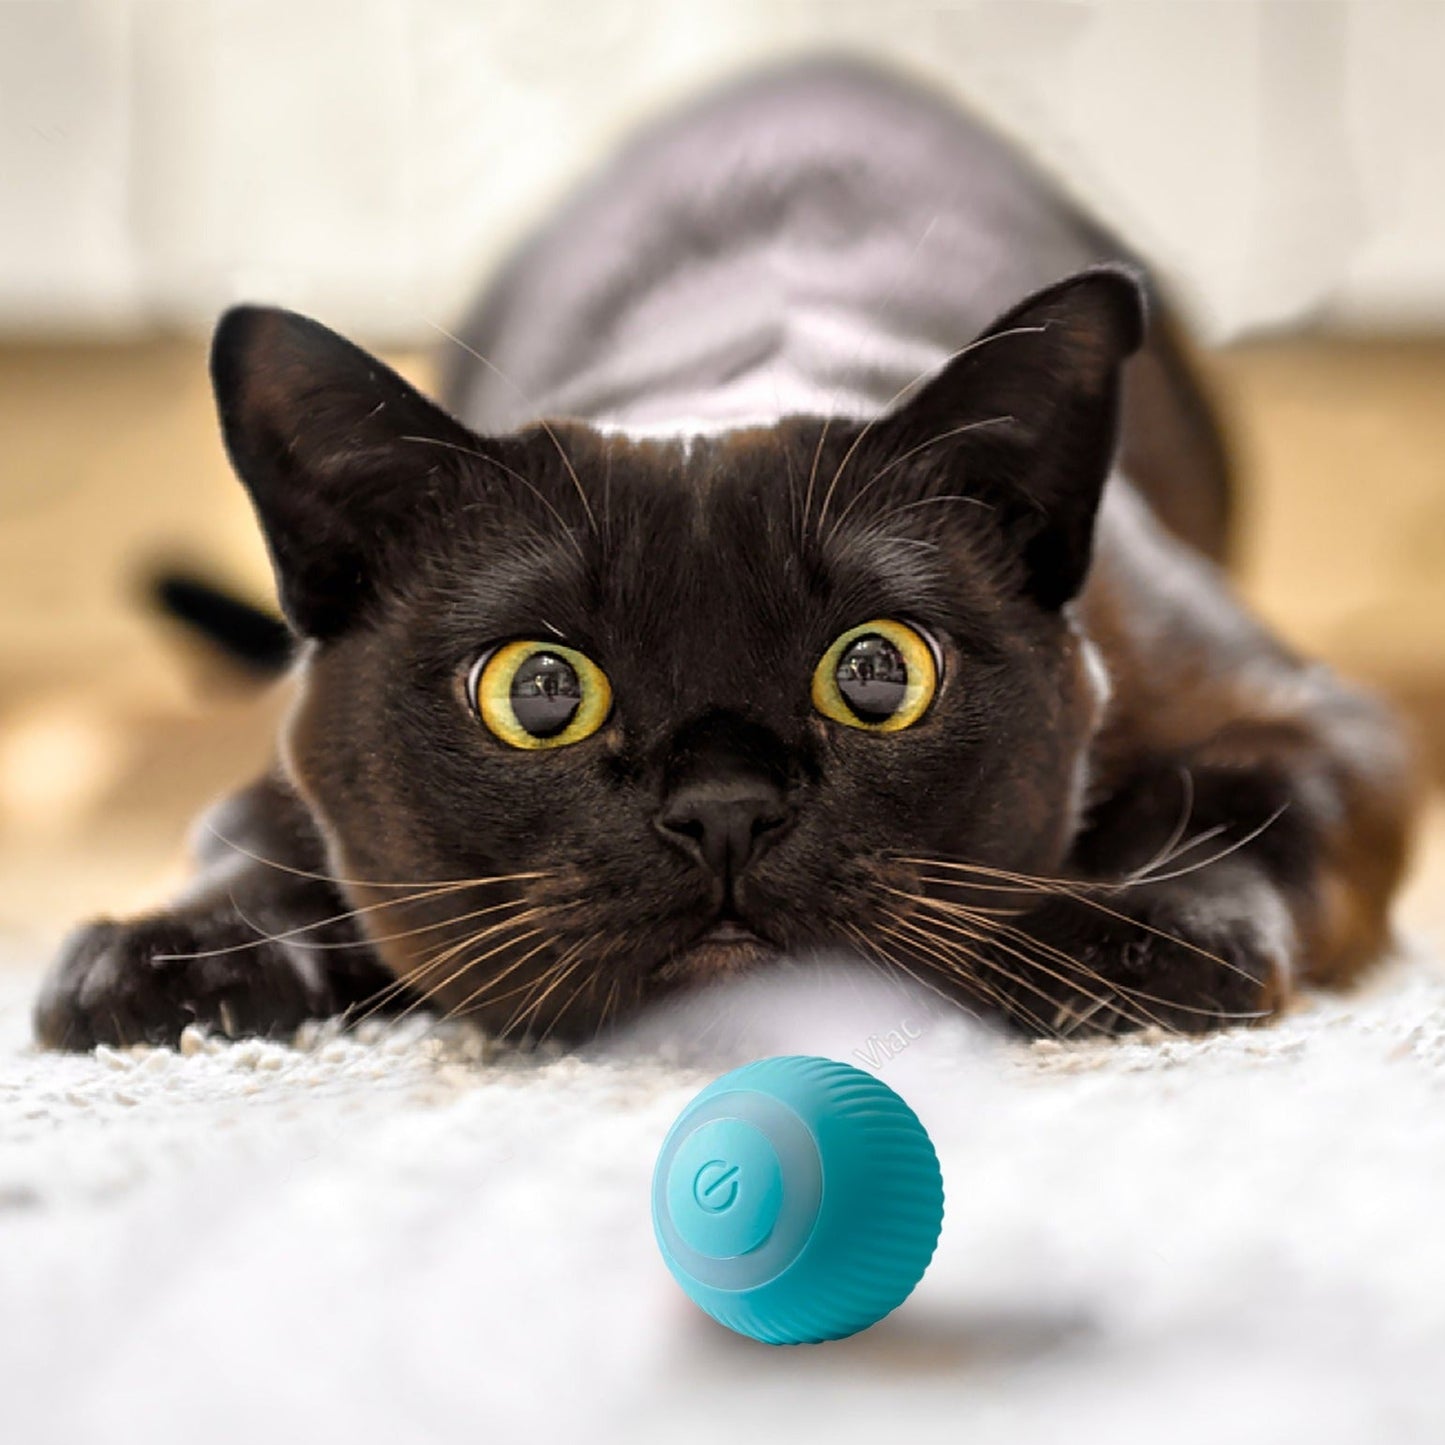 Electric Cat Ball Toy